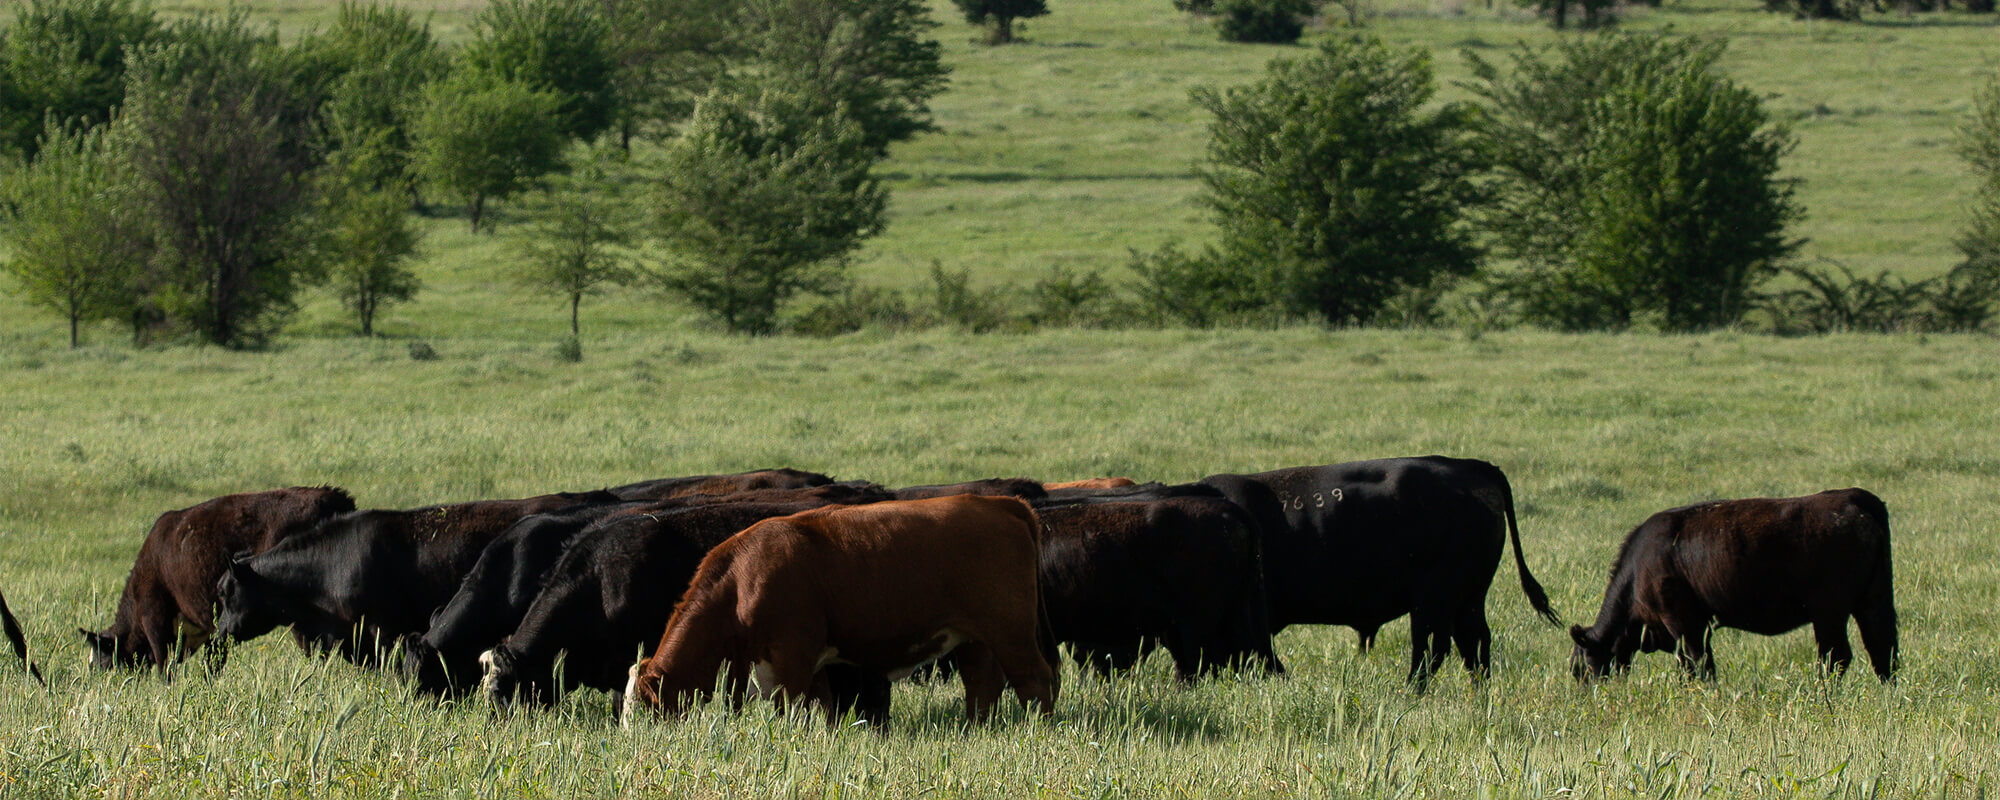 Cattle grazing in pasture with trees